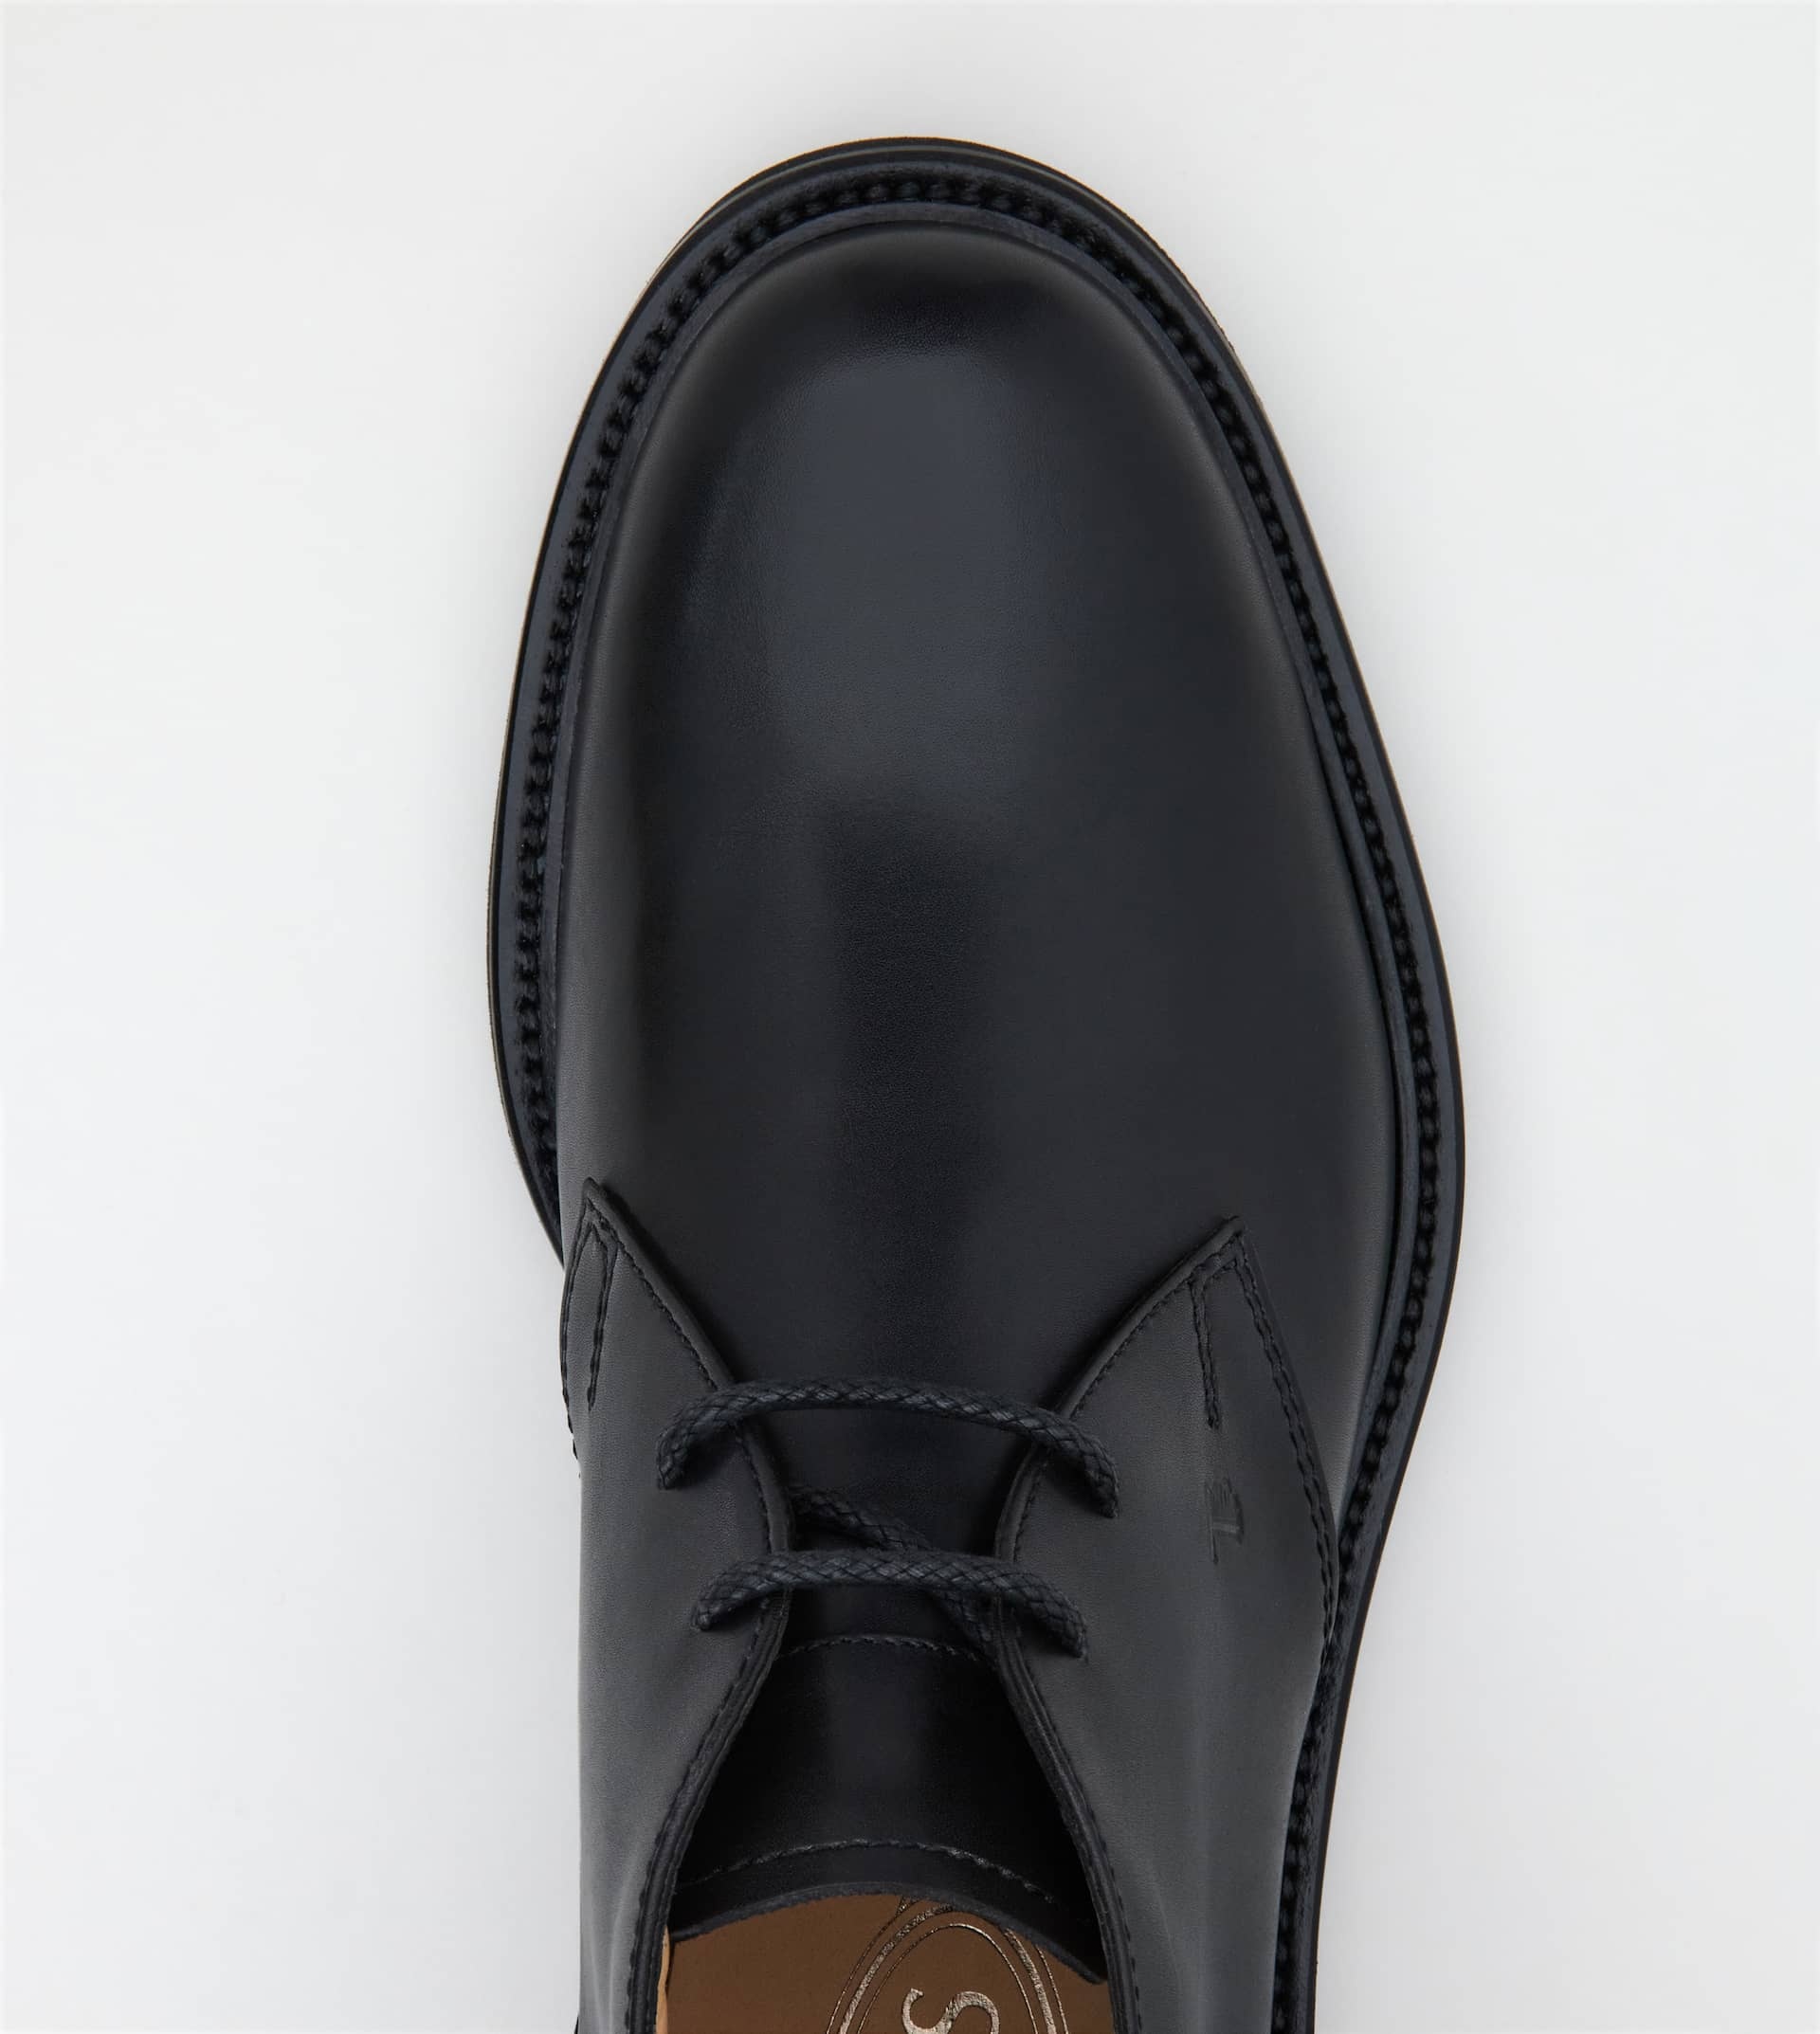 DESERT BOOTS IN LEATHER - BLACK - 4